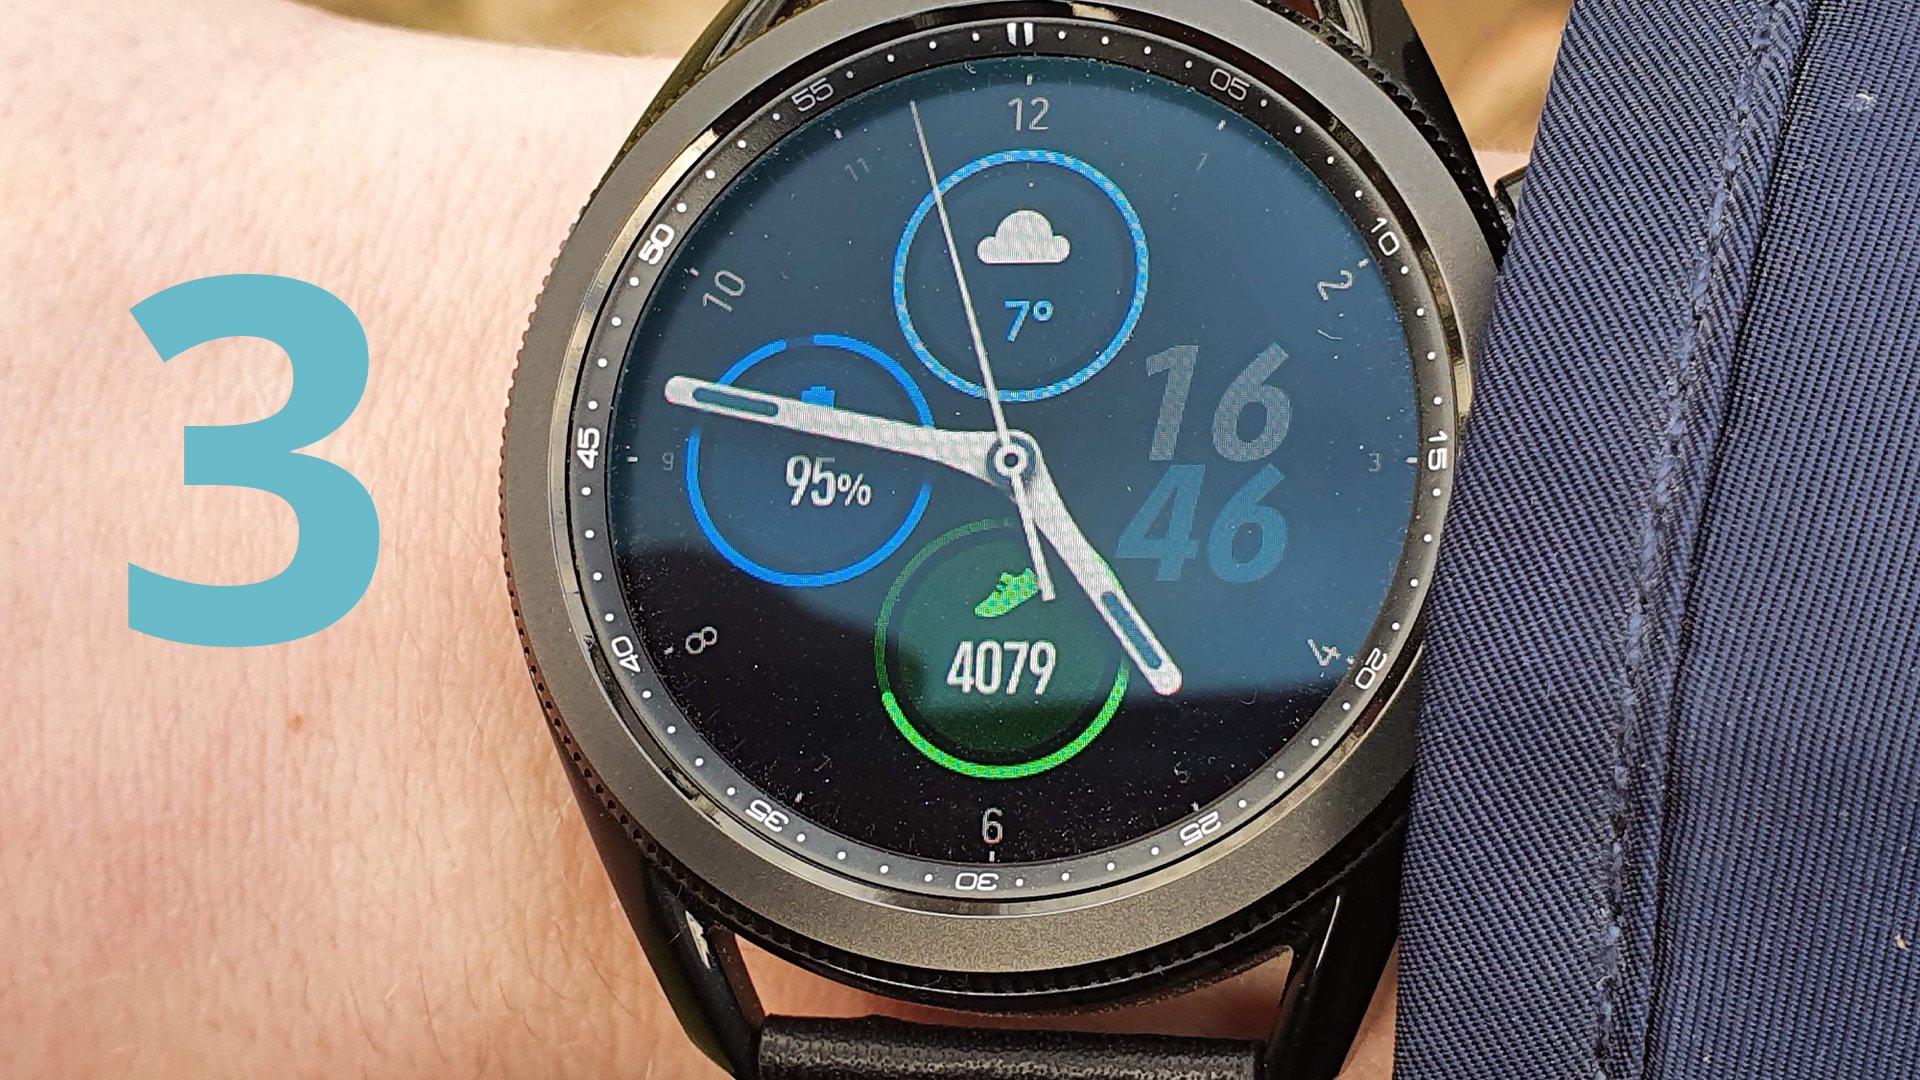 Samsung Galaxy Watch 3 review: best Android smartwatch